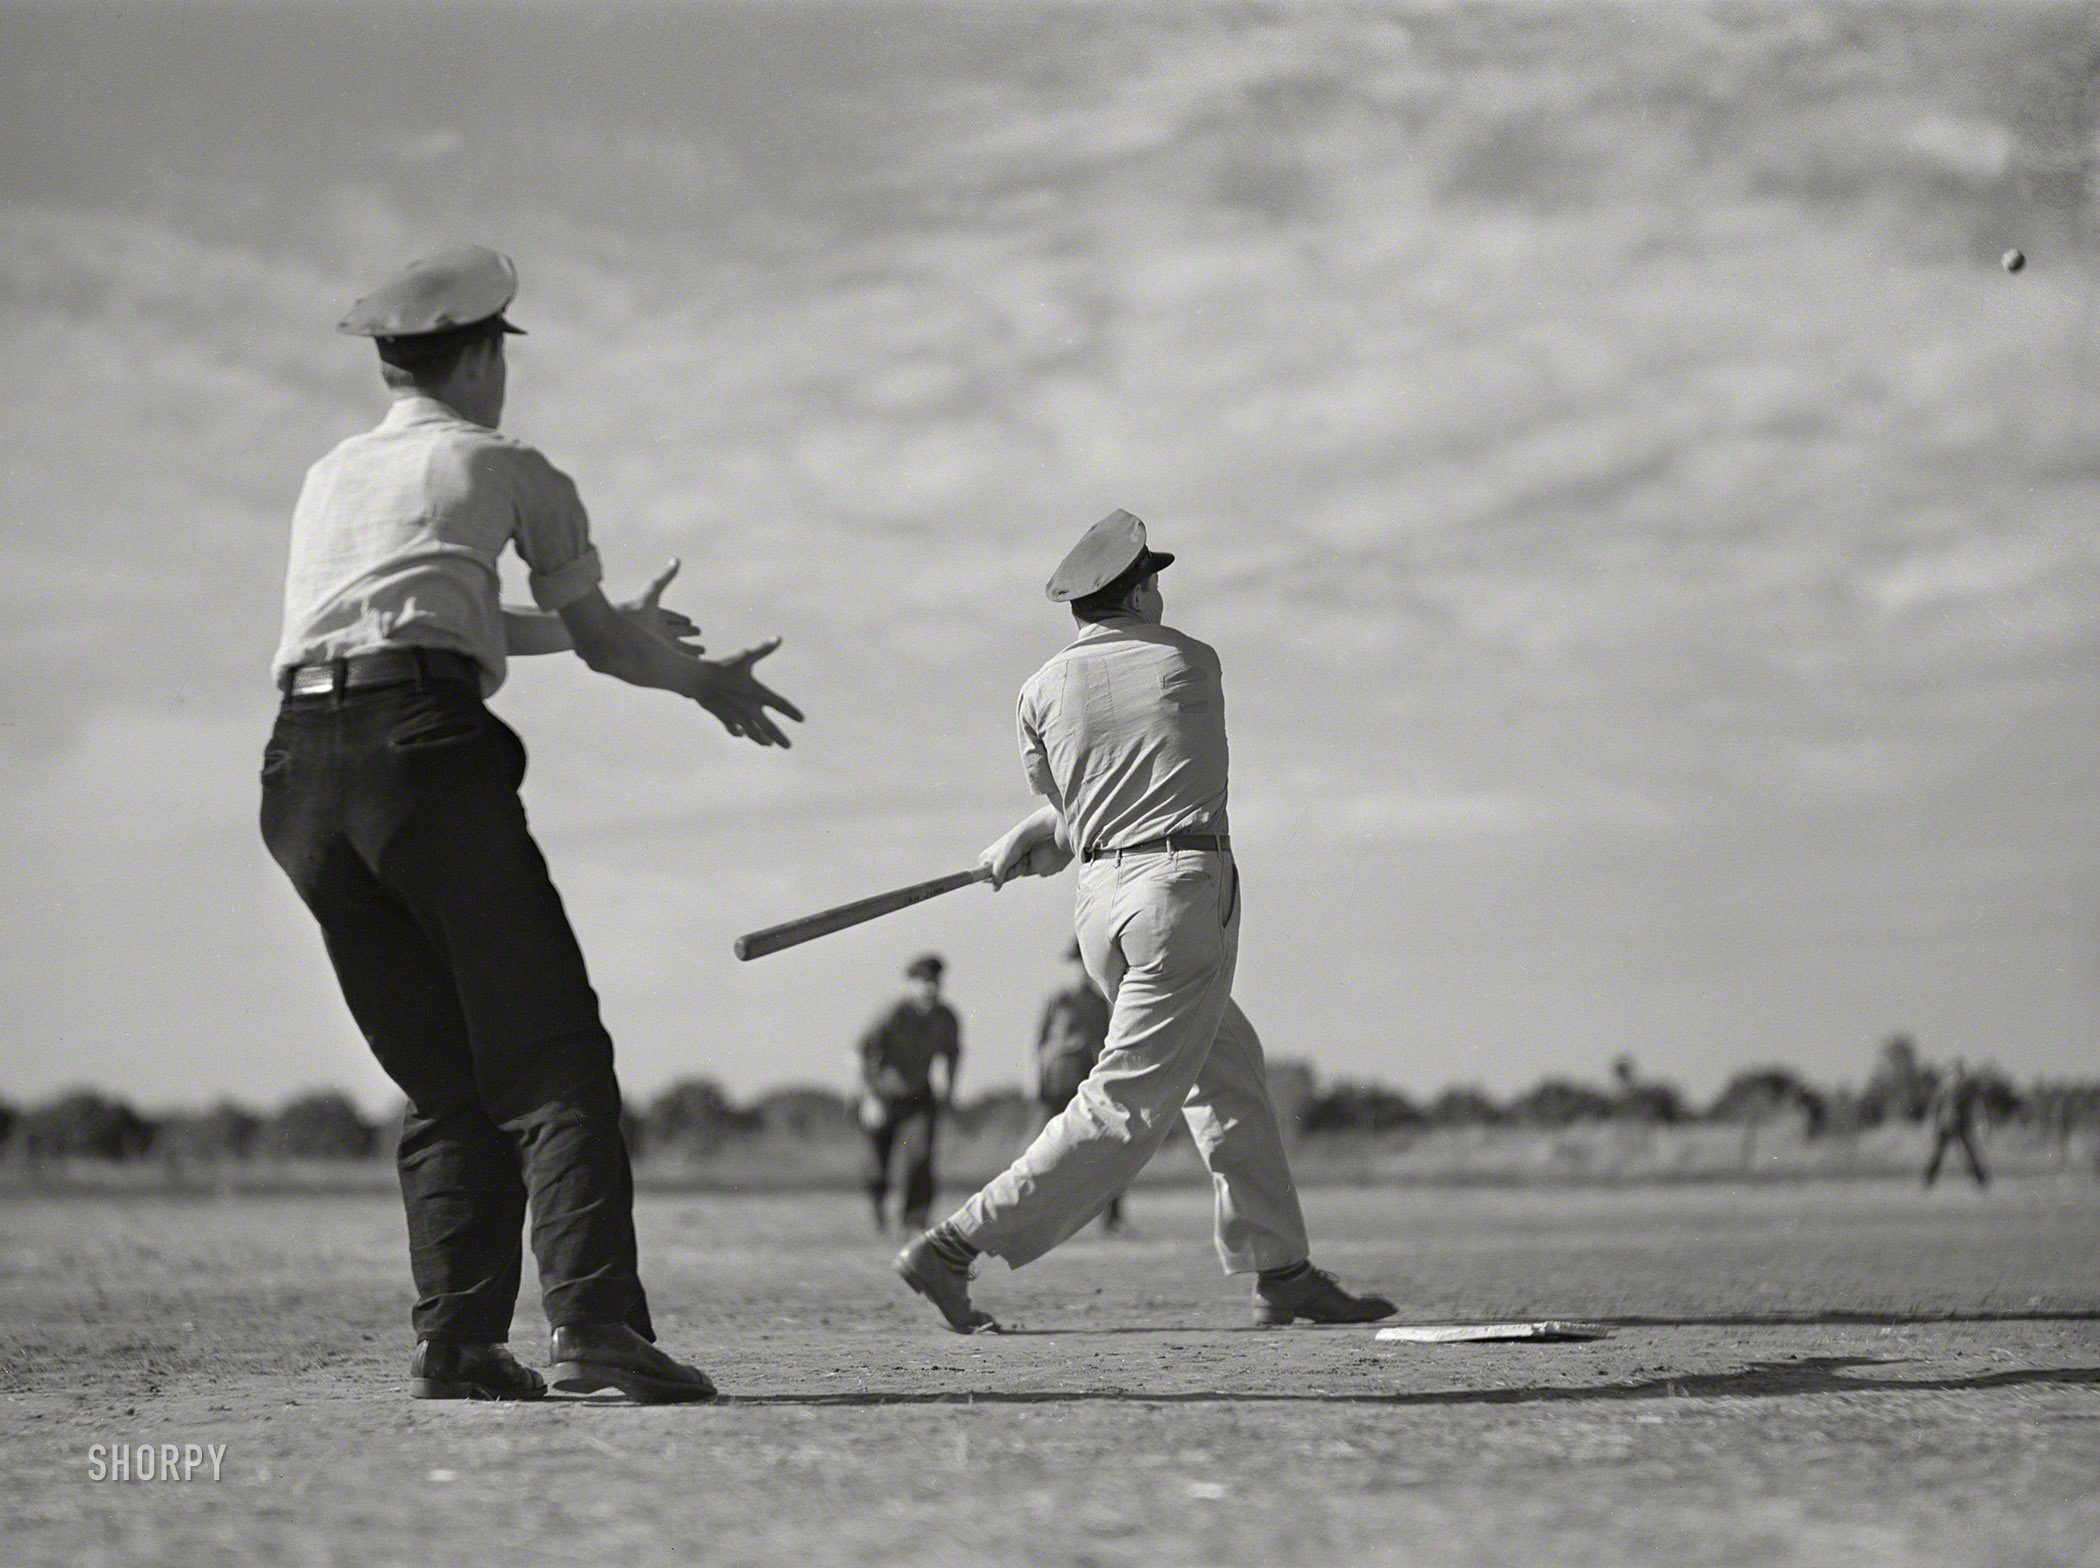 February 1942. "Weslaco, Texas. Saturday afternoon baseball game at Mercer G. Evans FSA camp." Photo by Arthur Rothstein for the Farm Security Administration. View full size.